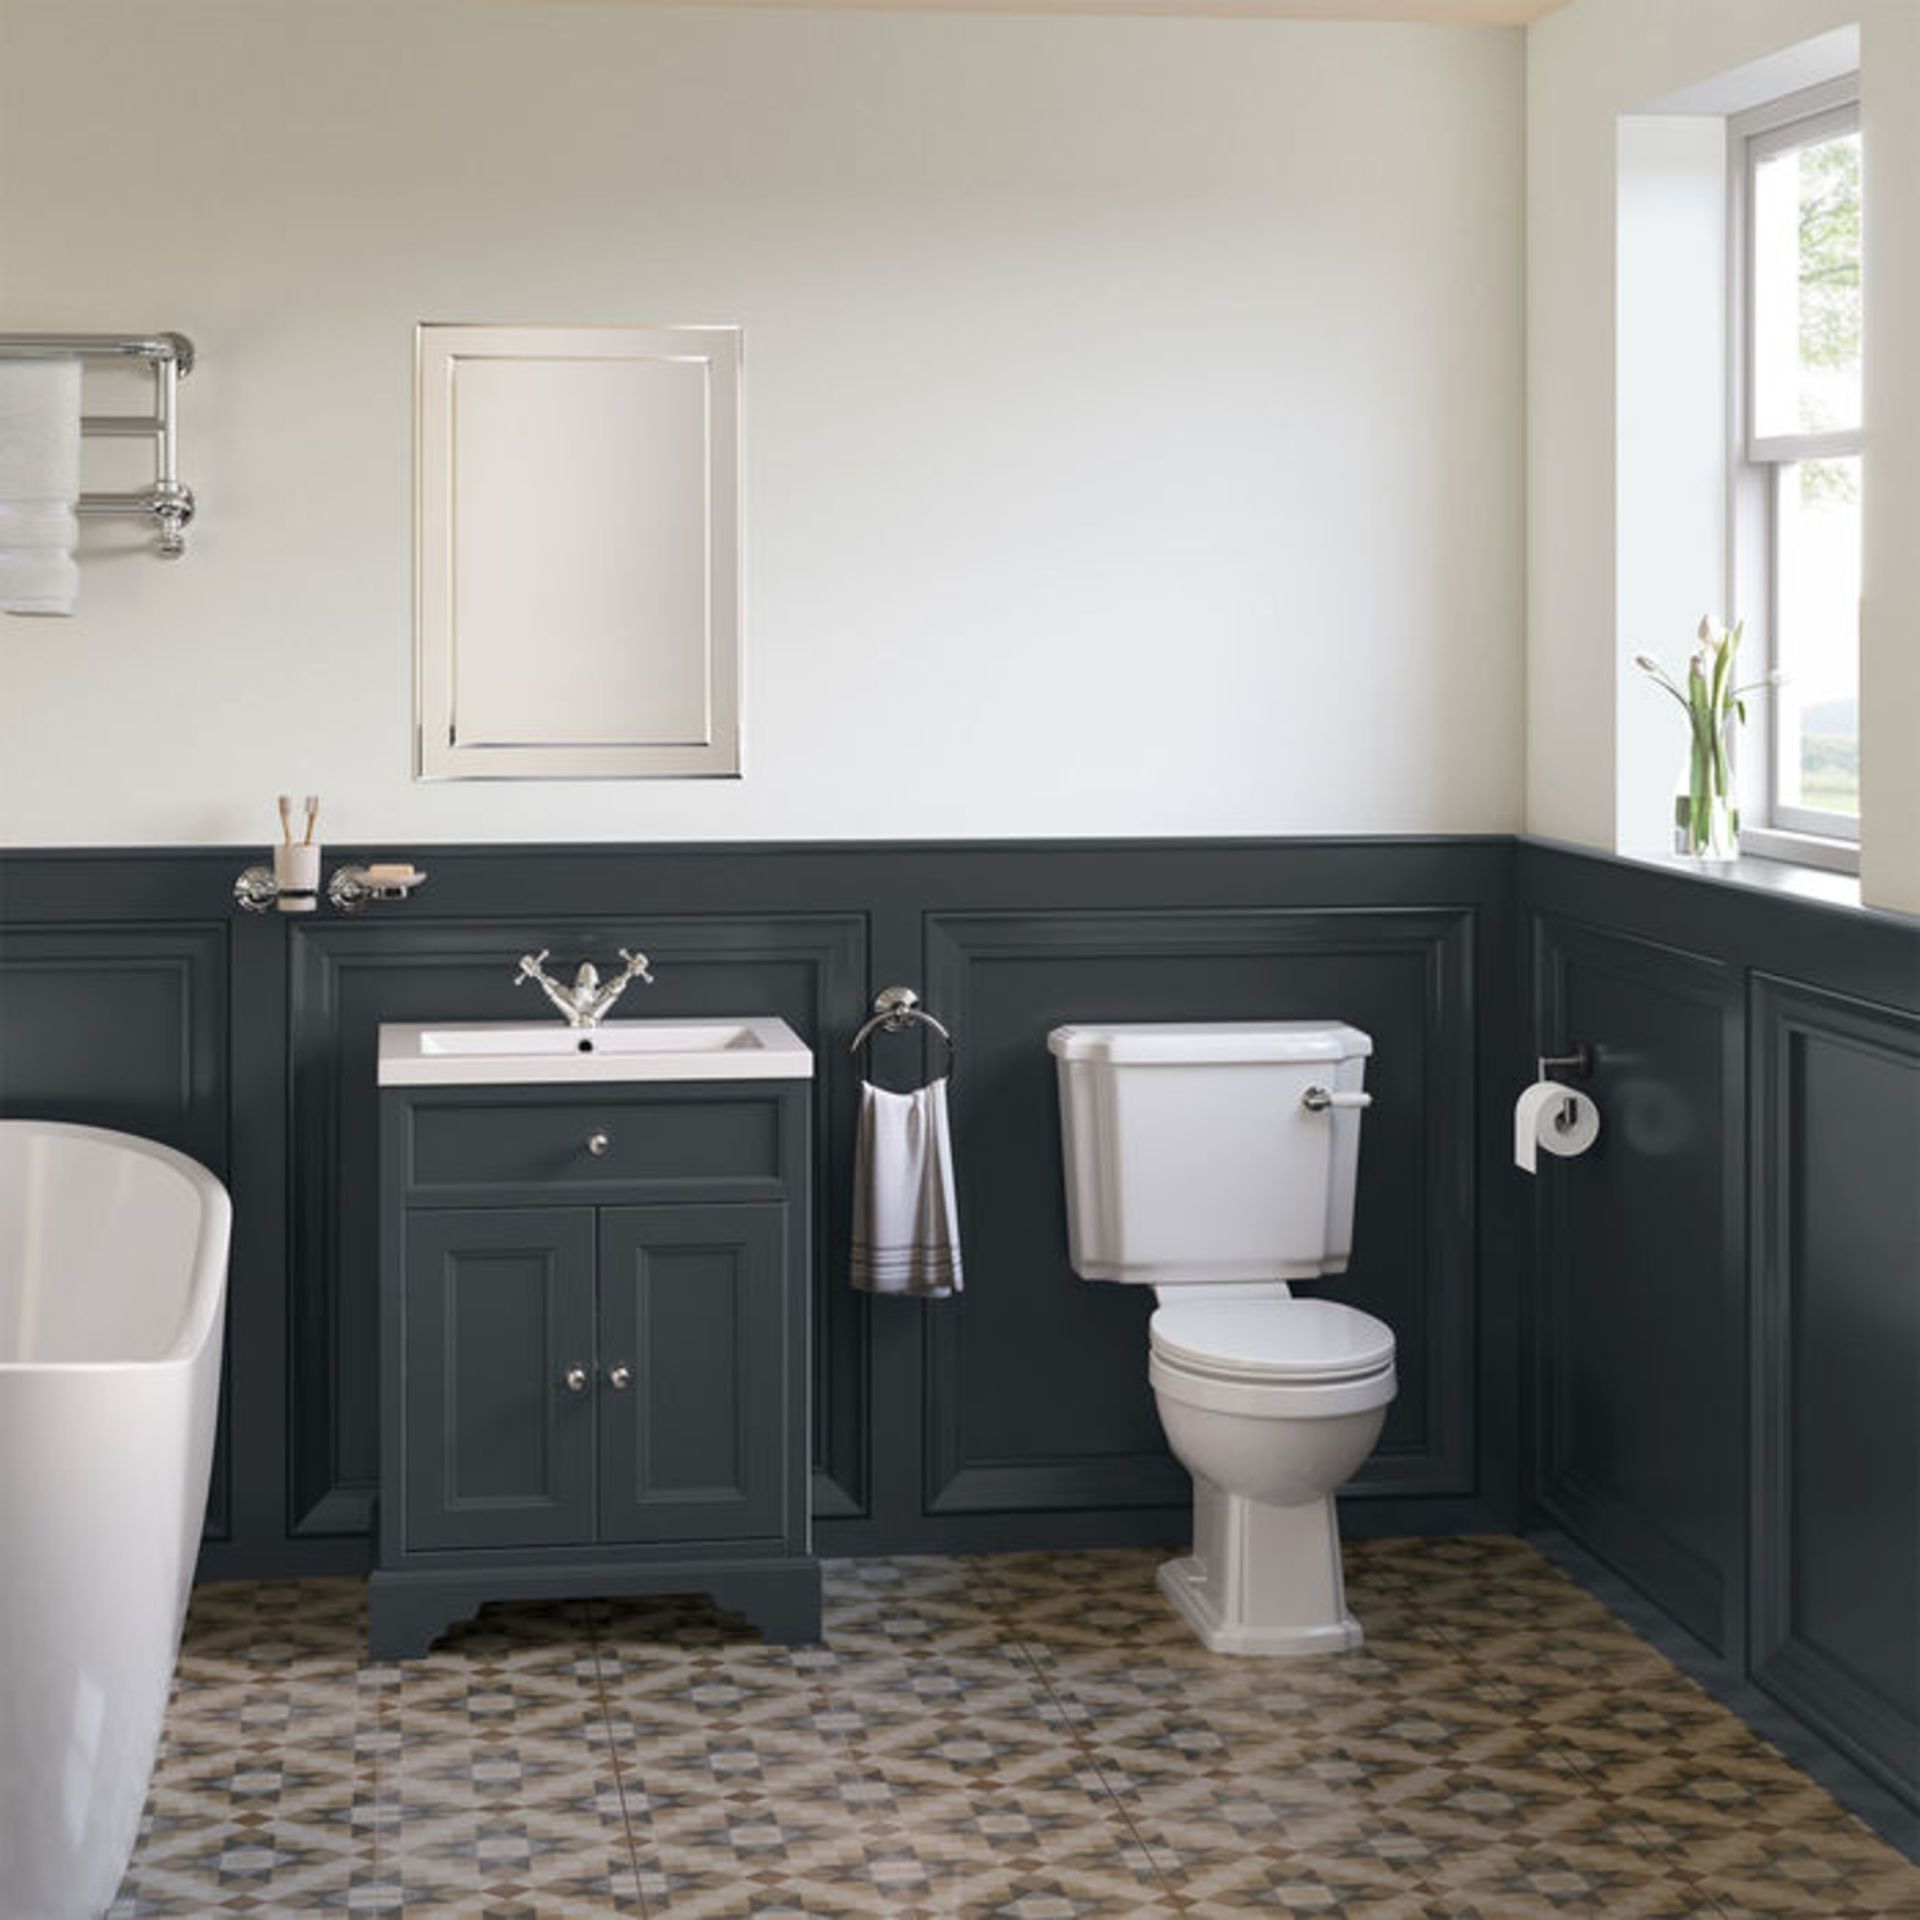 NEW & BOXED 600mm Loxley Charcoal Vanity Unit - Floor Standing. RRP £1,074.99.MF9002.Stunning... - Image 3 of 3